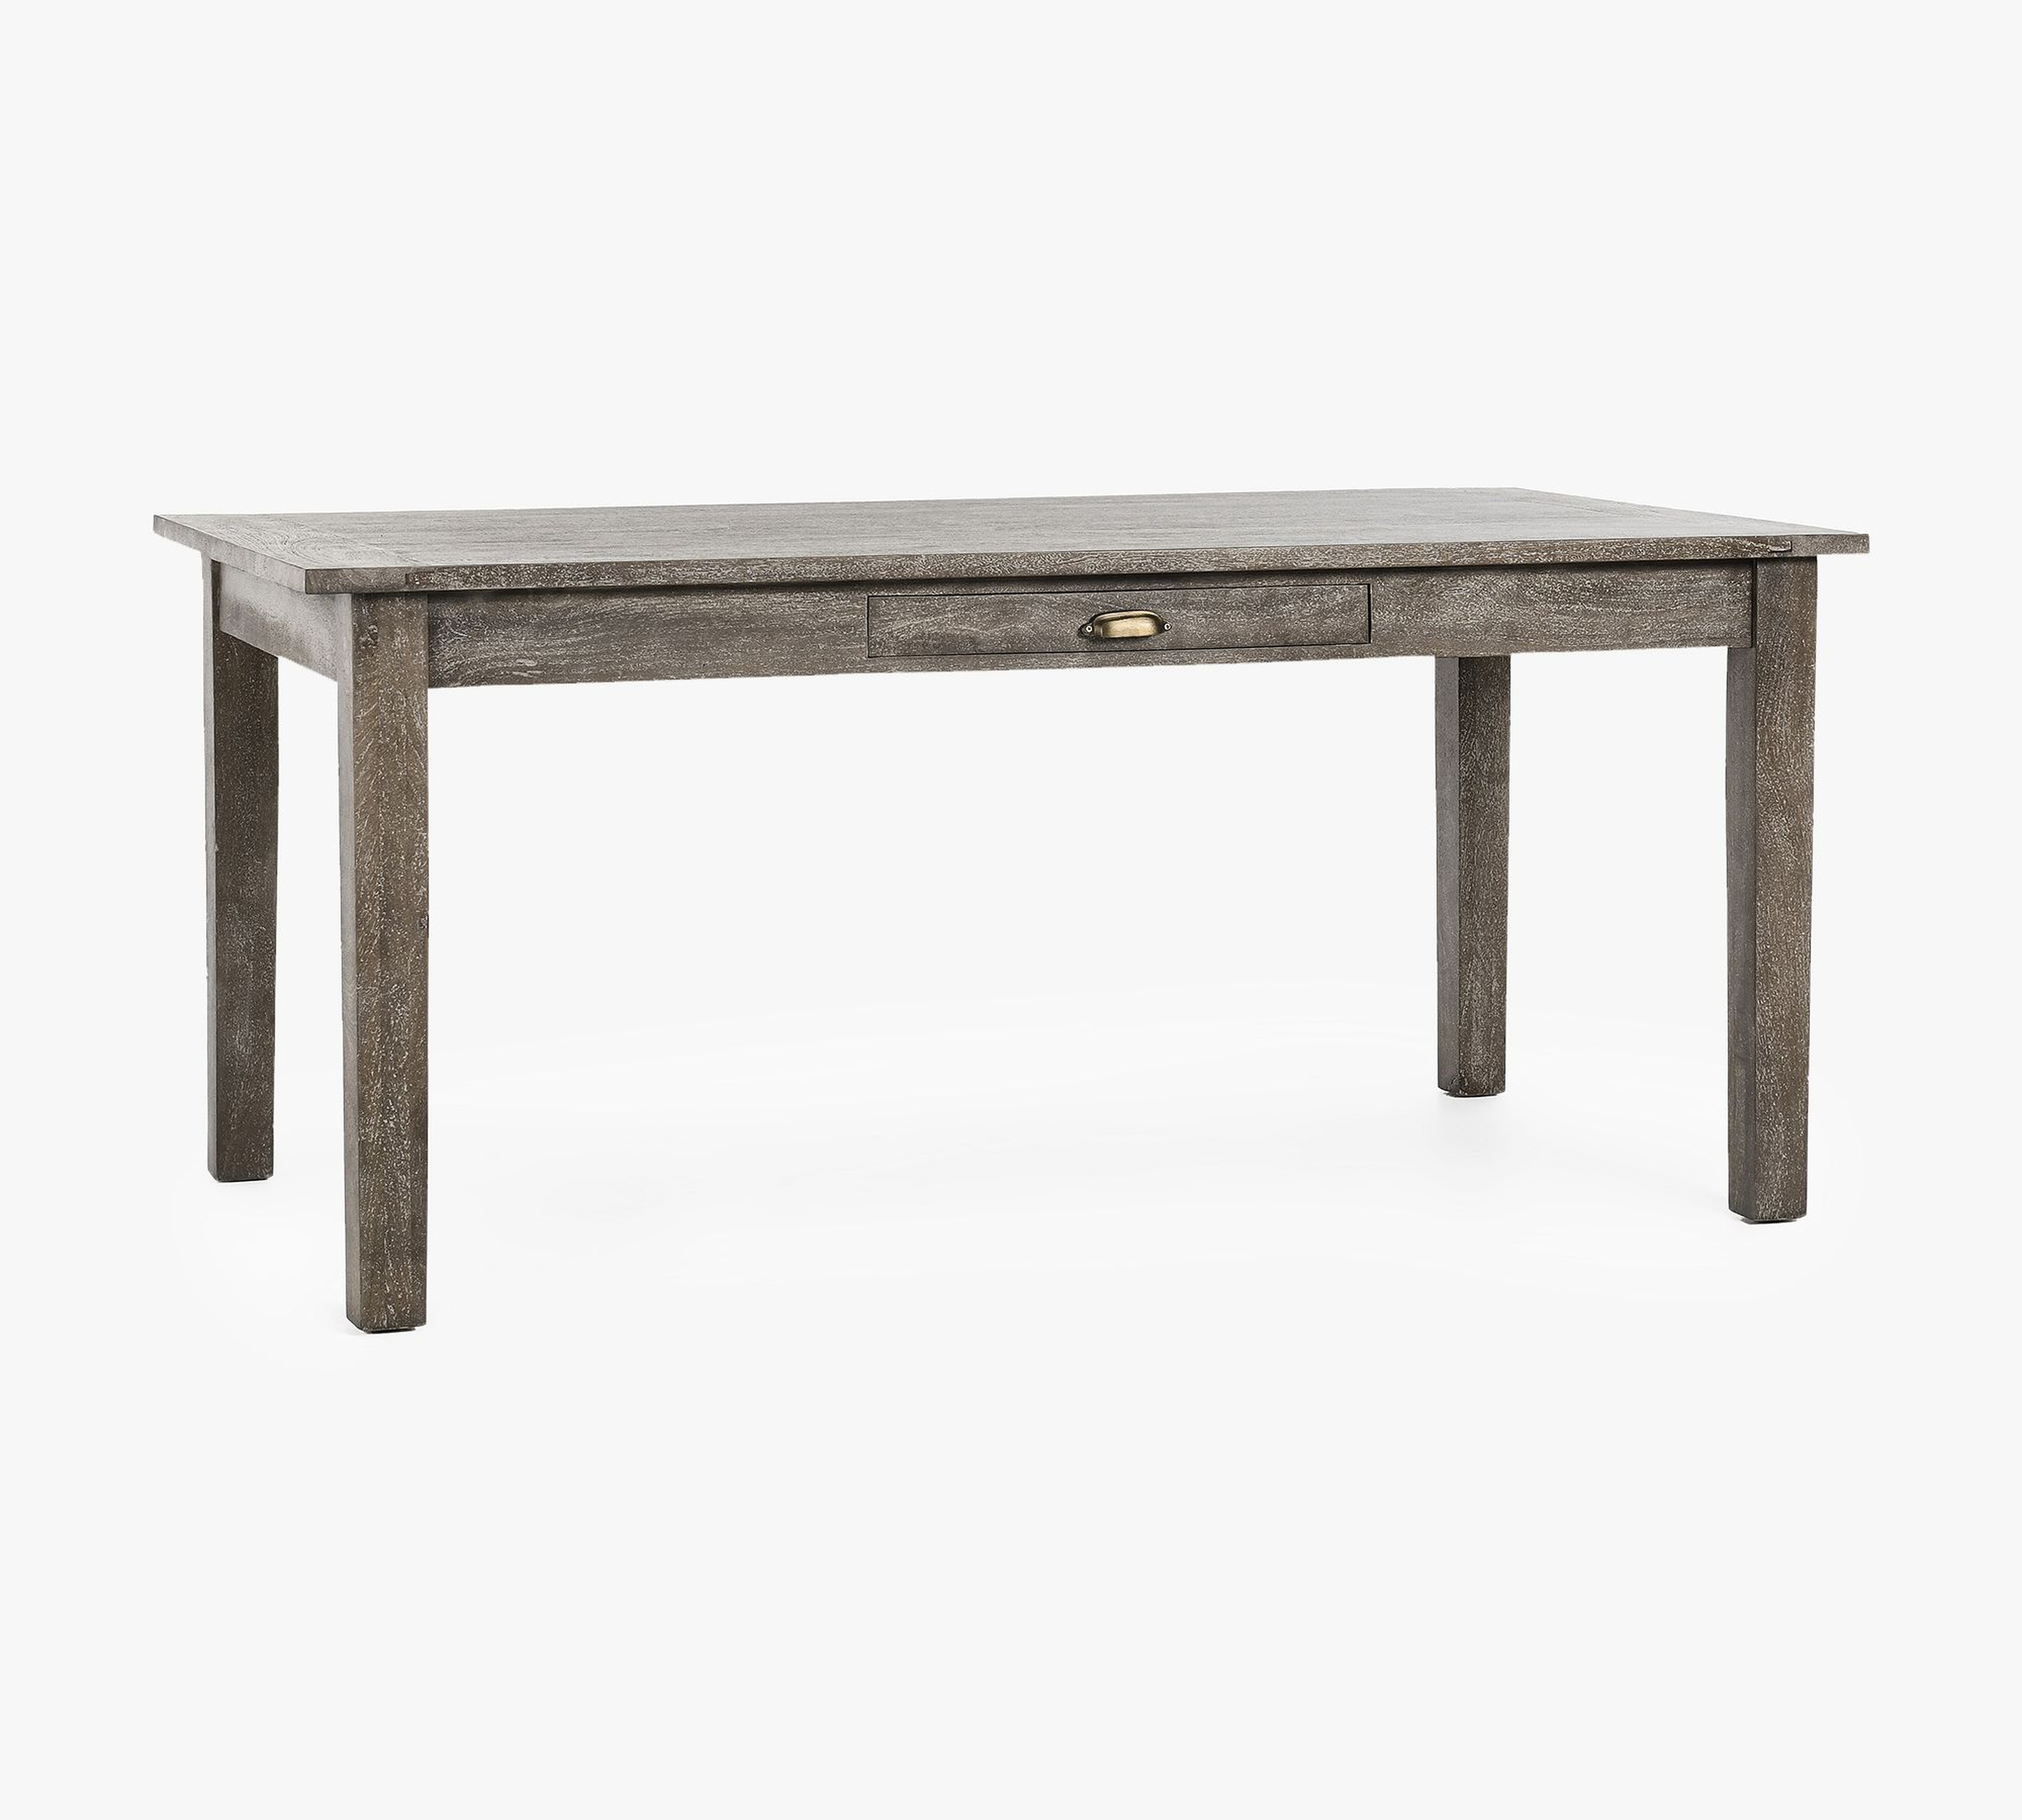 Arrington Dining Table, Antique Taupe, 68"L - Pottery Barn